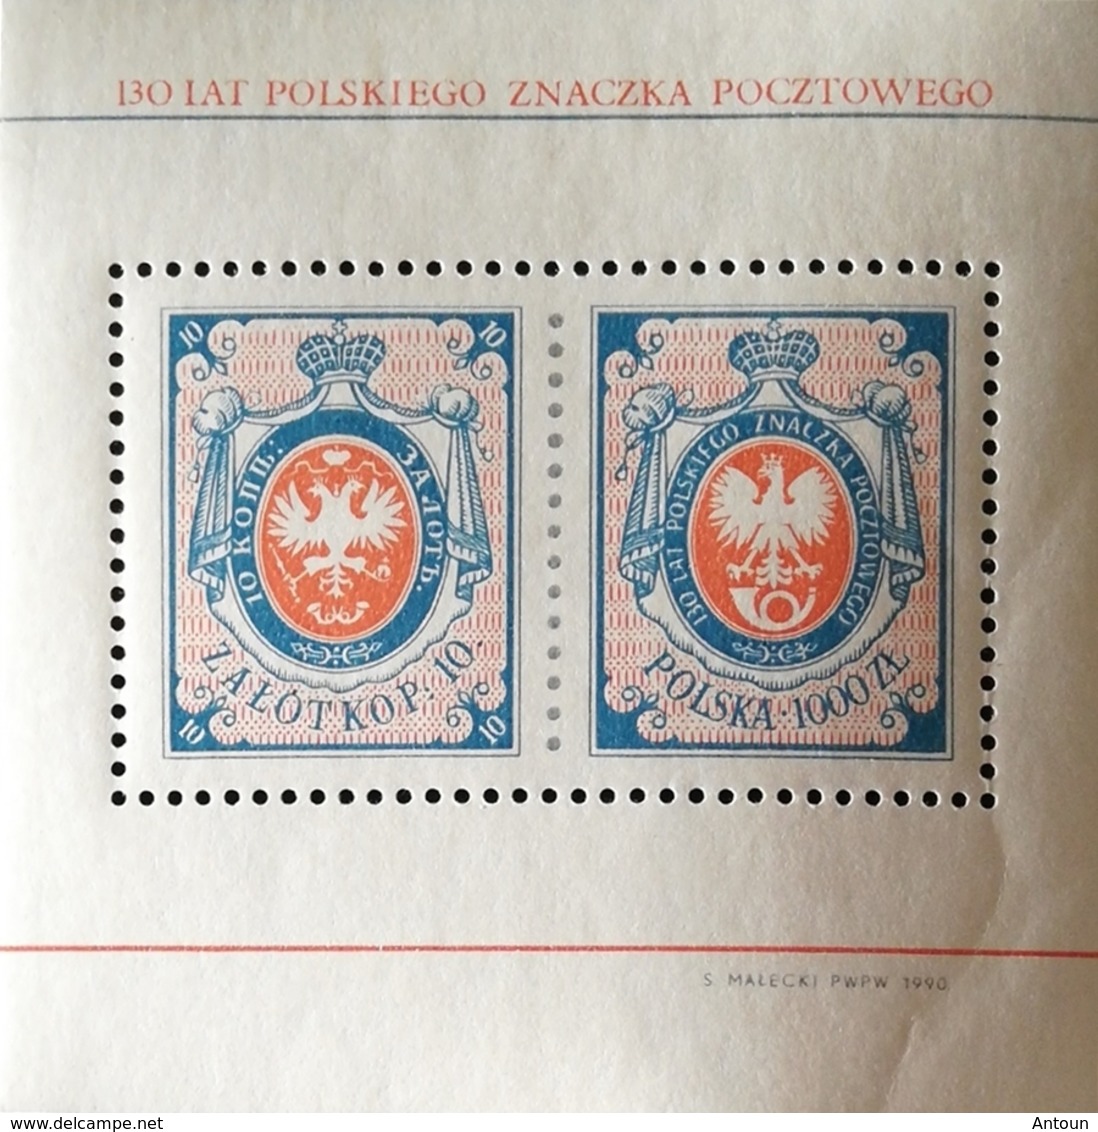 Poland  1990 First Polish Postage Stamp, 130th. Anniv. S/S - Unused Stamps